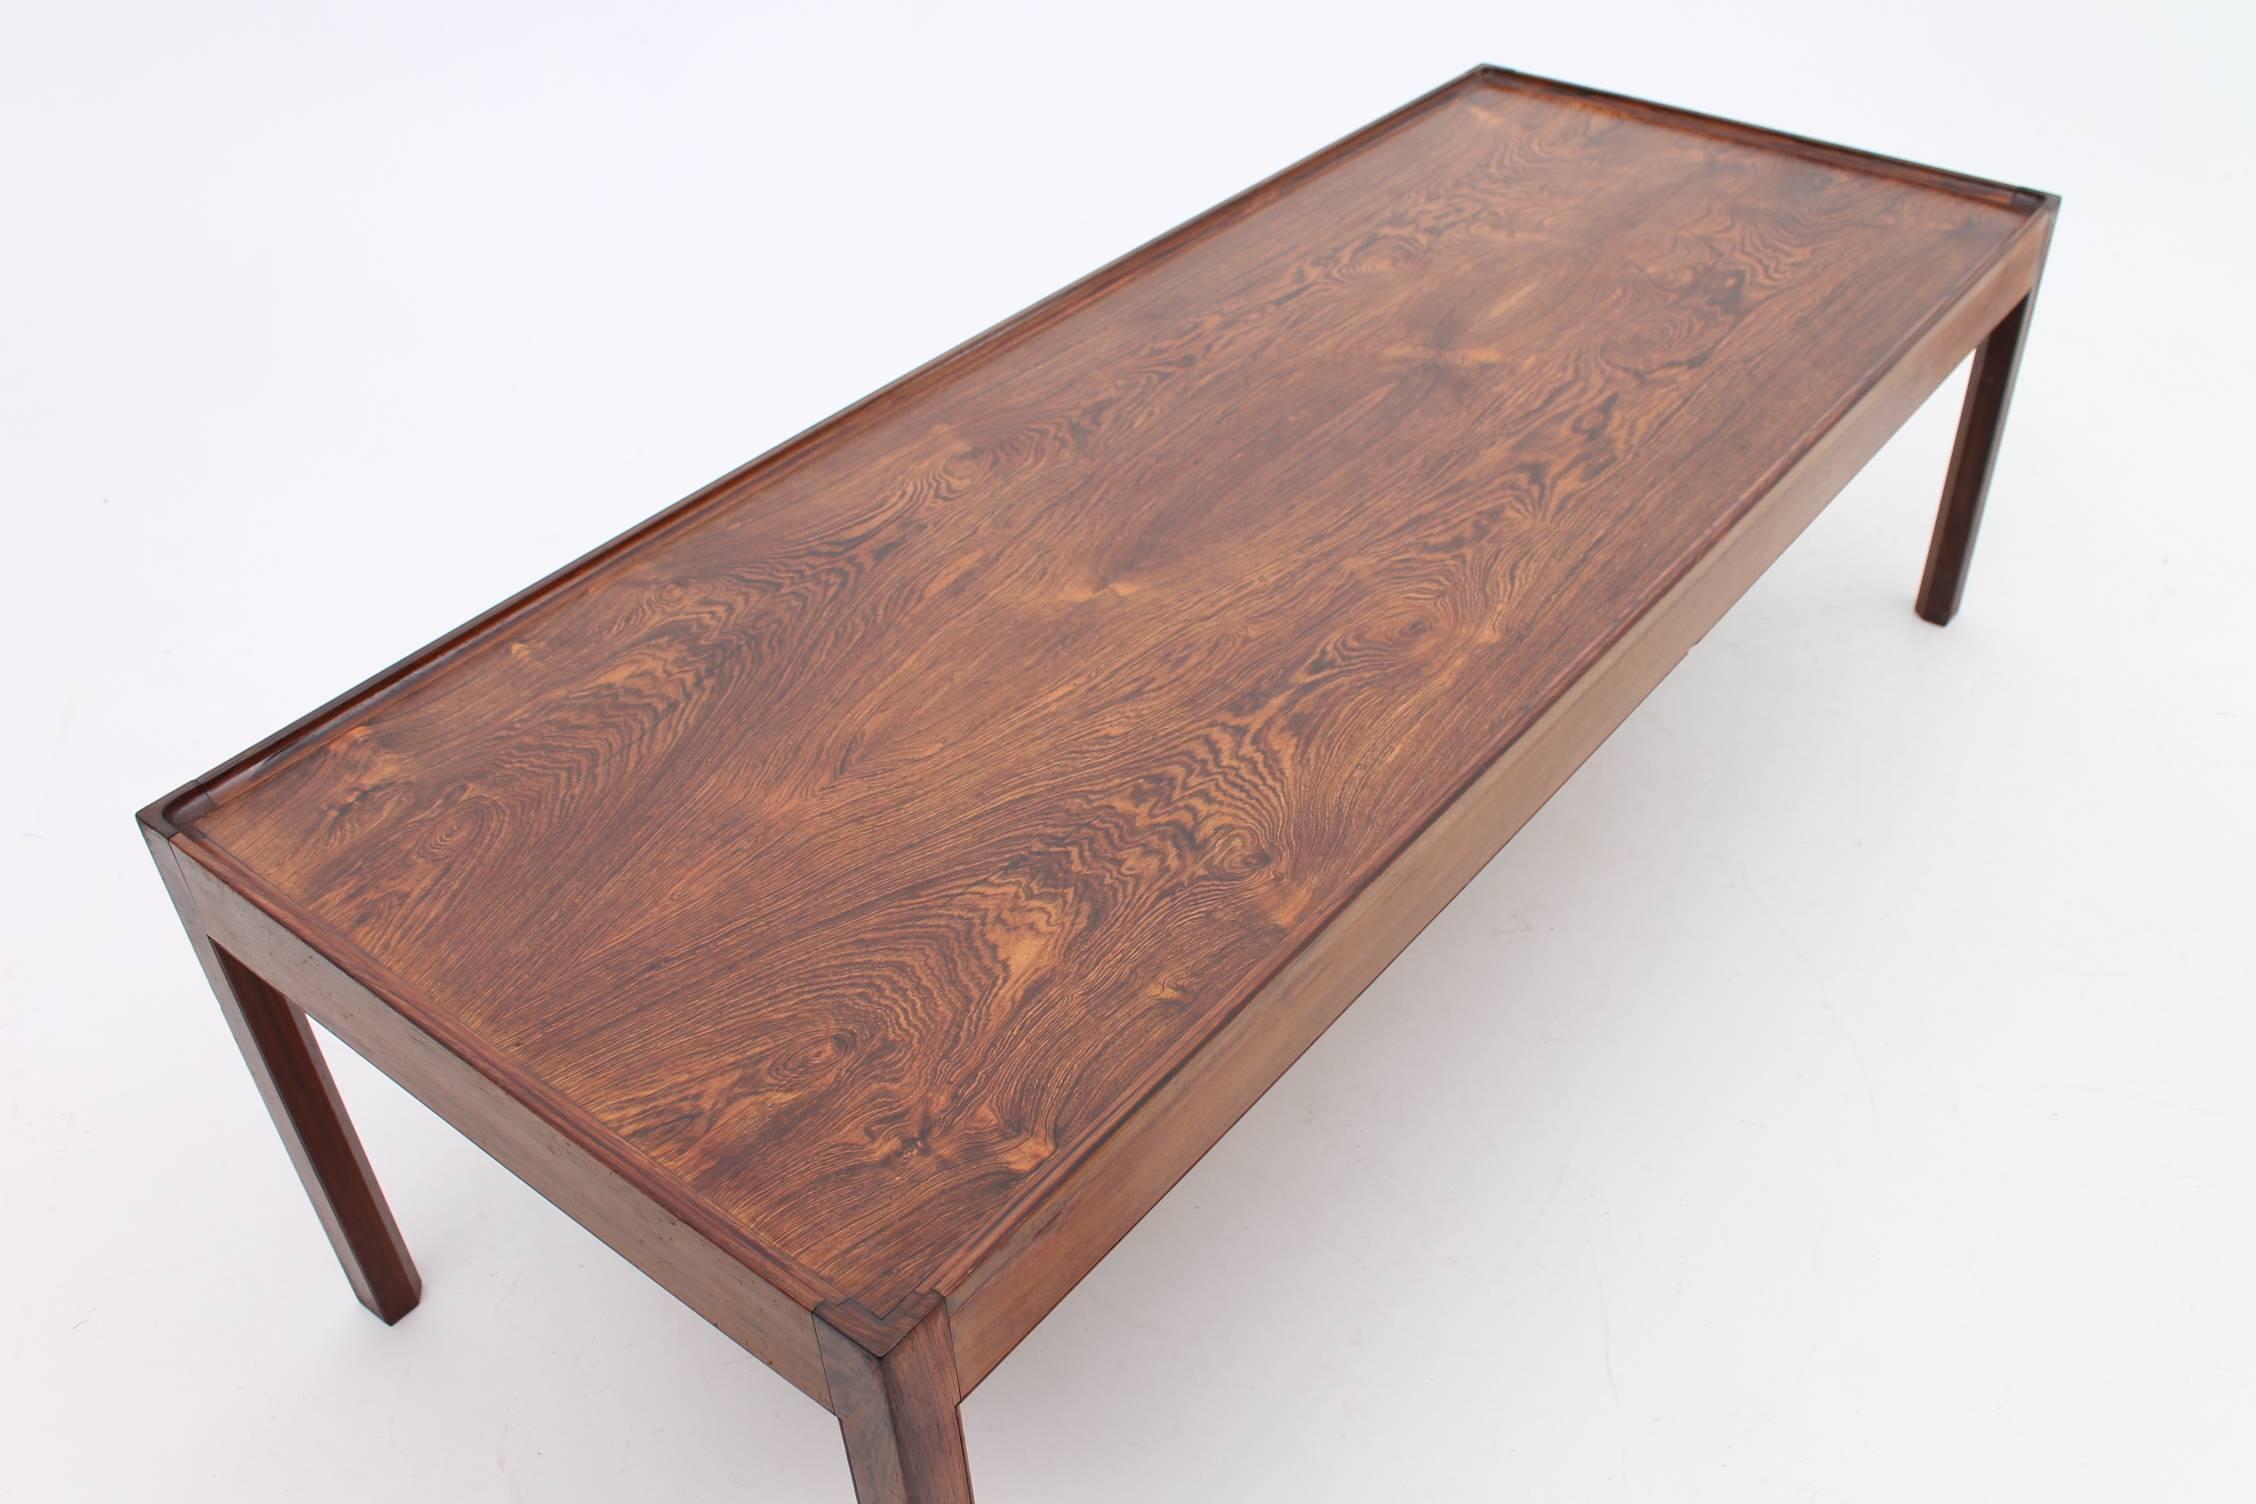 Rosewood coffee table designed and manufactured by an unknown designer. This table has a small “lip” around the edge of it, so you don’t have to worry about things rolling off of it. The functional yet beautiful design of this table makes it a huge